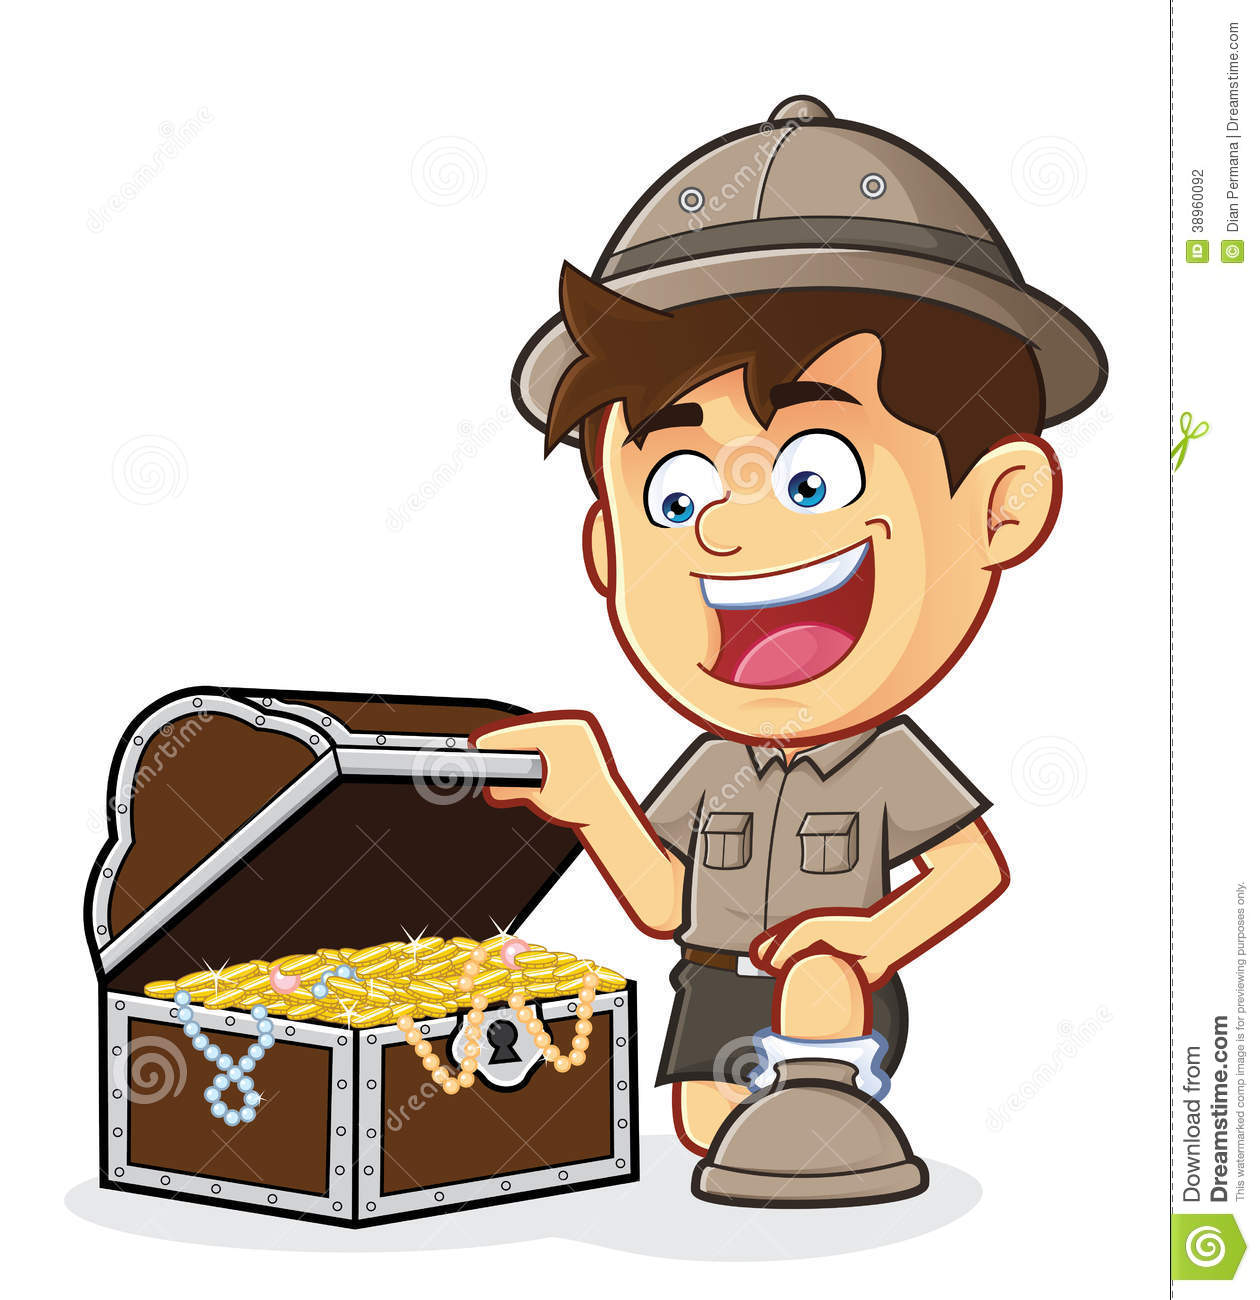 Boy Scout Or Explorer Boy With A Treasure Chest Stock Vector   Image